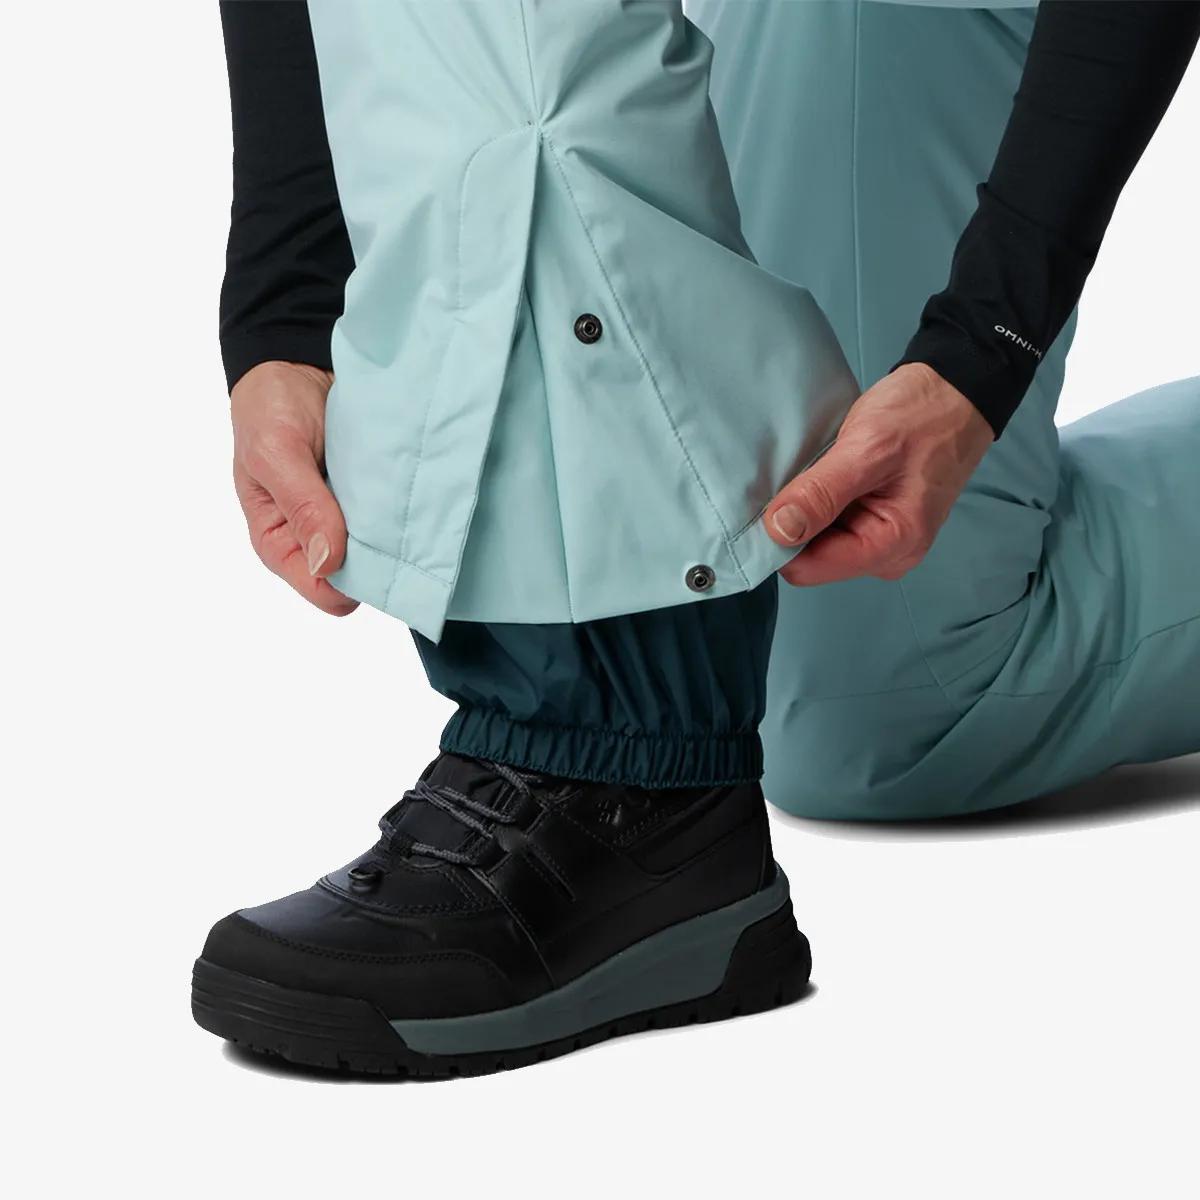 COLUMBIA Shafer Canyon™ Insulated Pant 